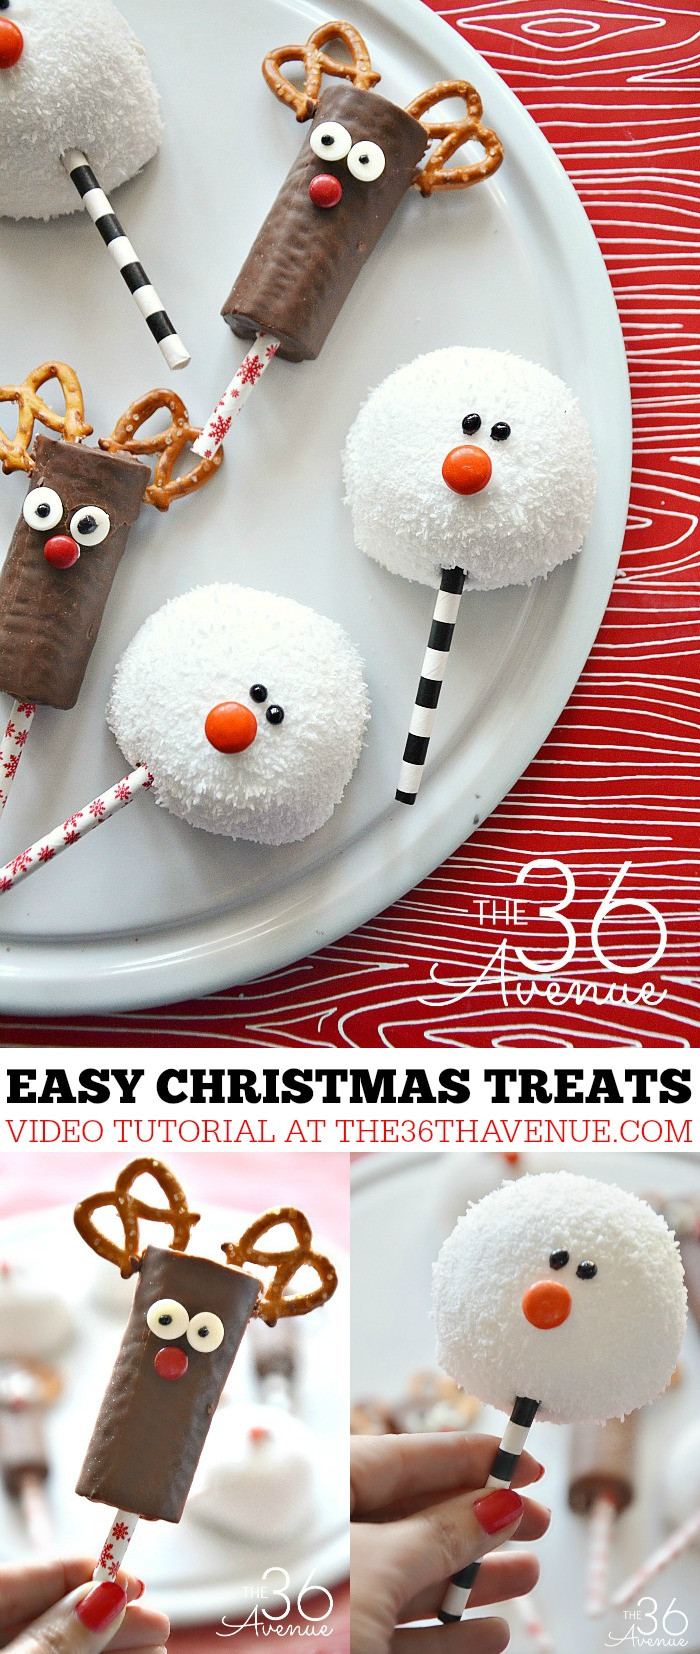 Cookies To Make For Christmas
 Christmas Treats Reindeer and Snowman The 36th AVENUE